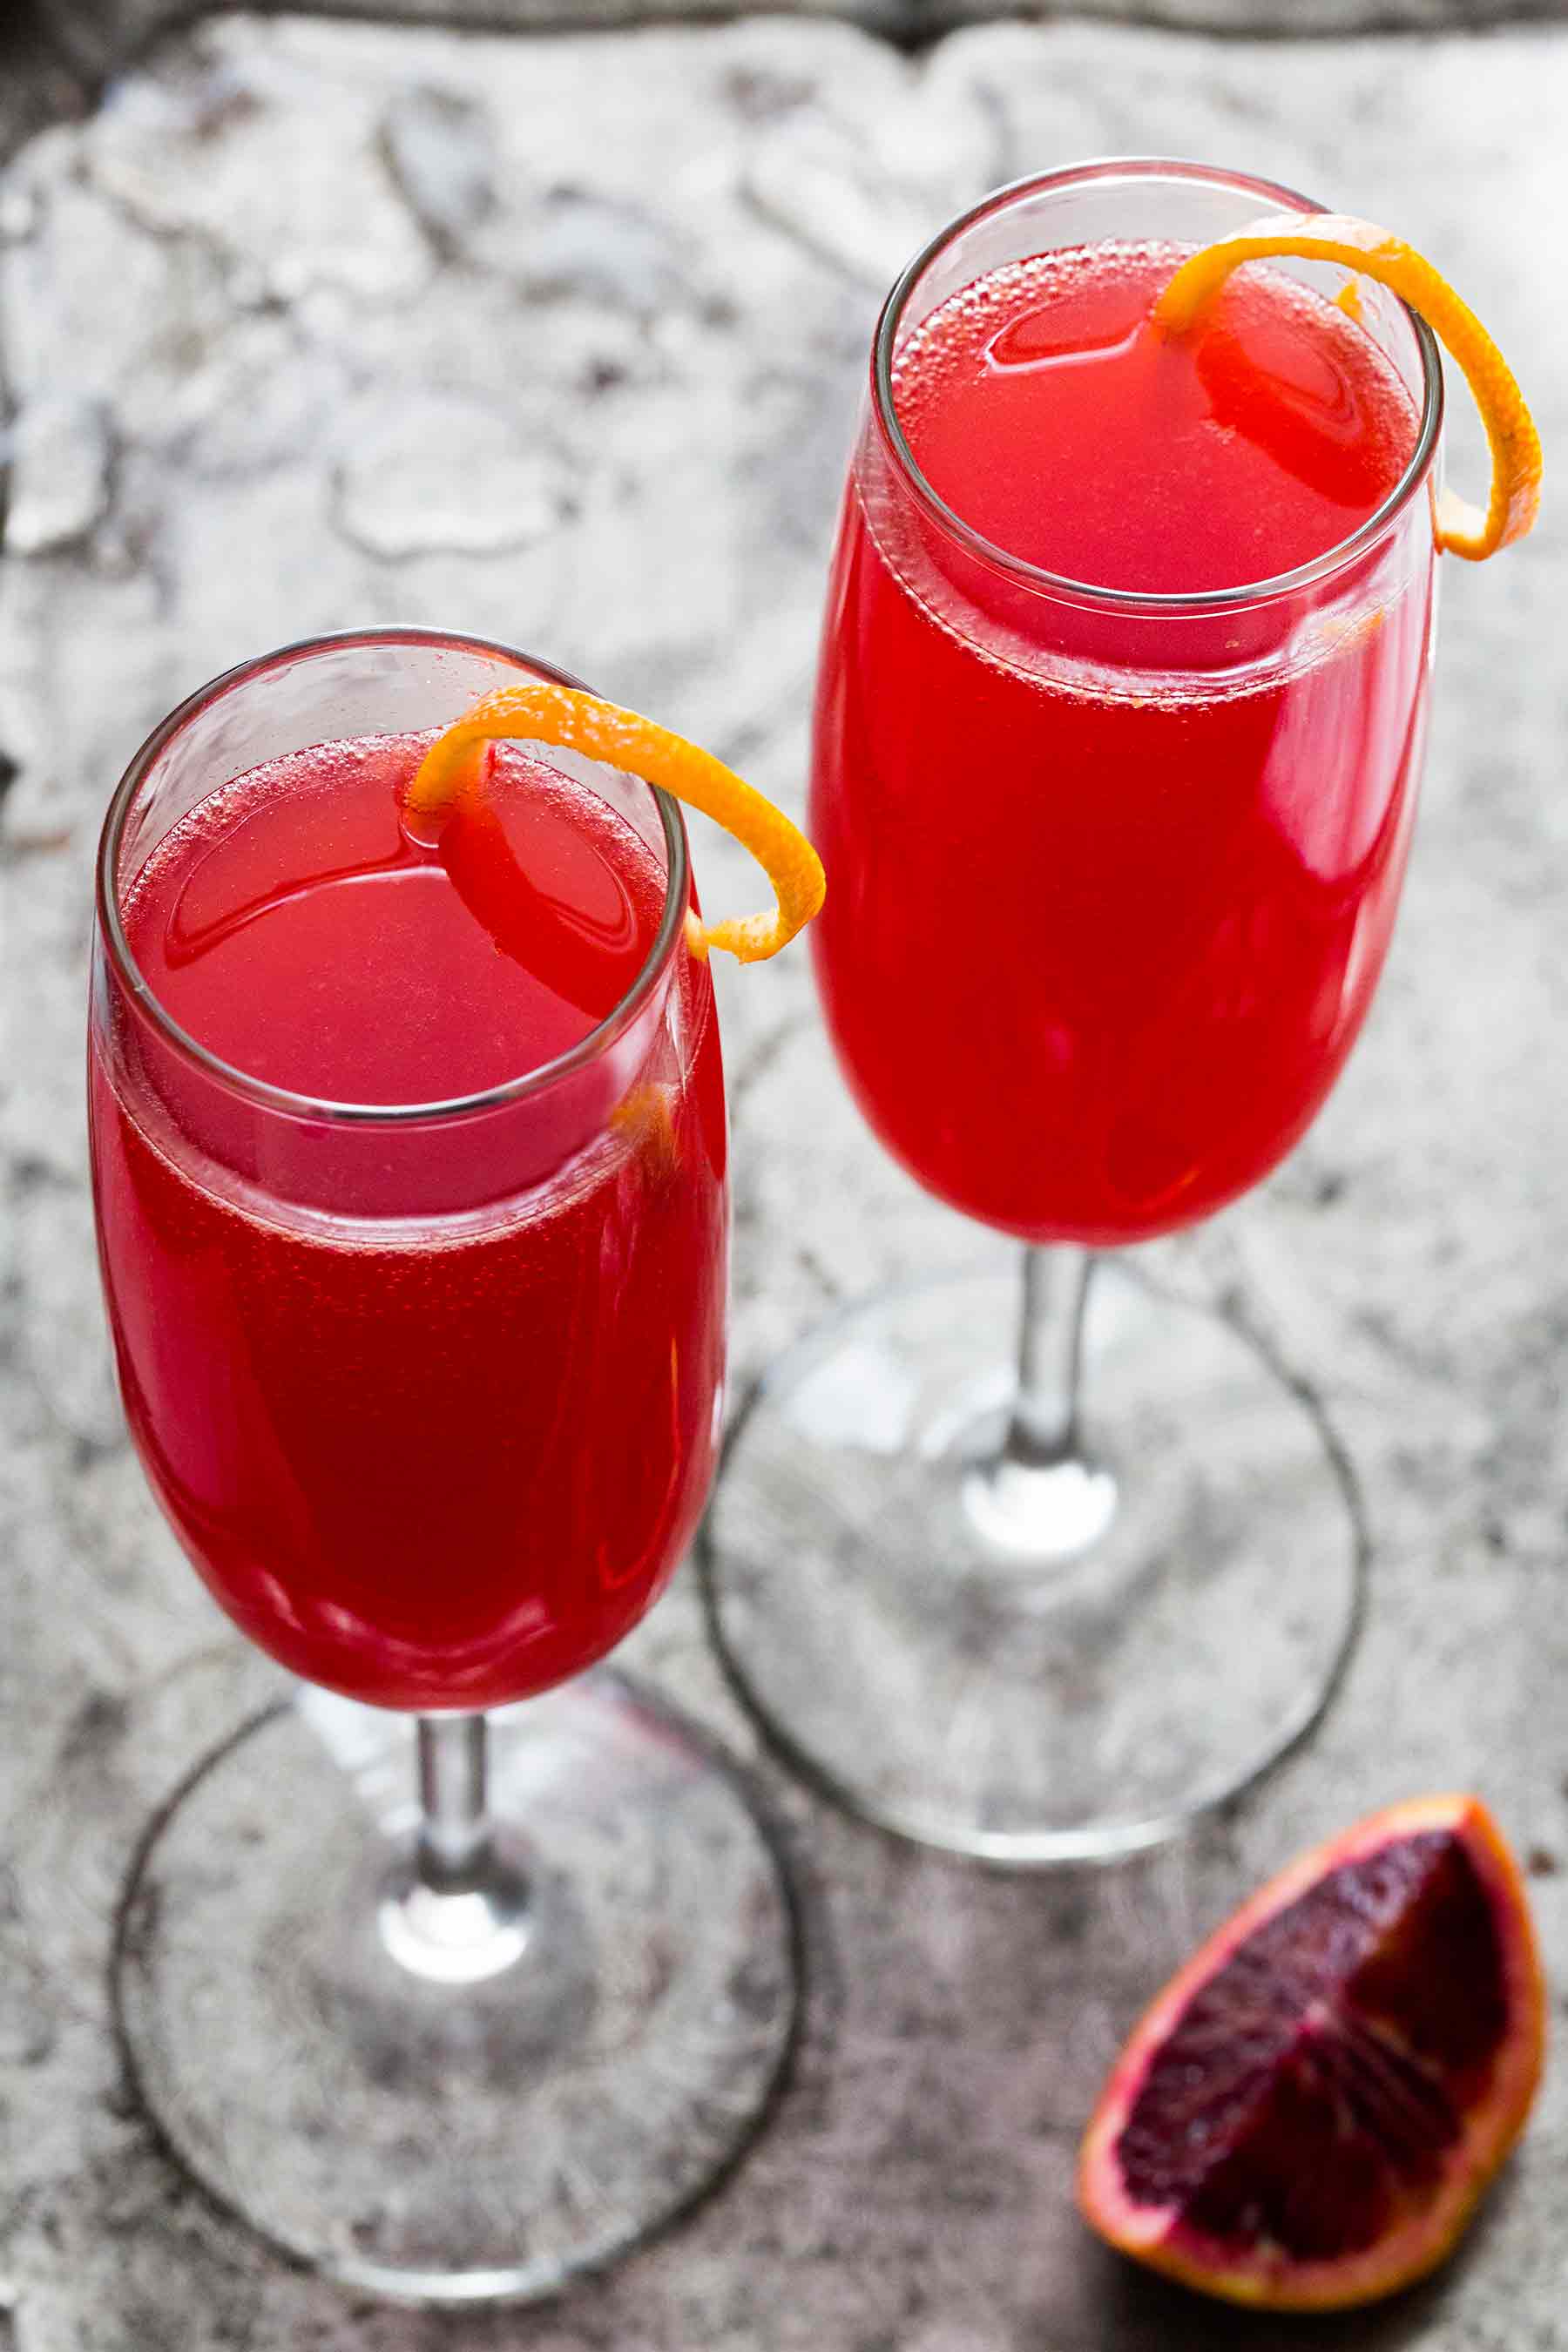 Blood-orange-french-75-cocktail-vertical-a-1800